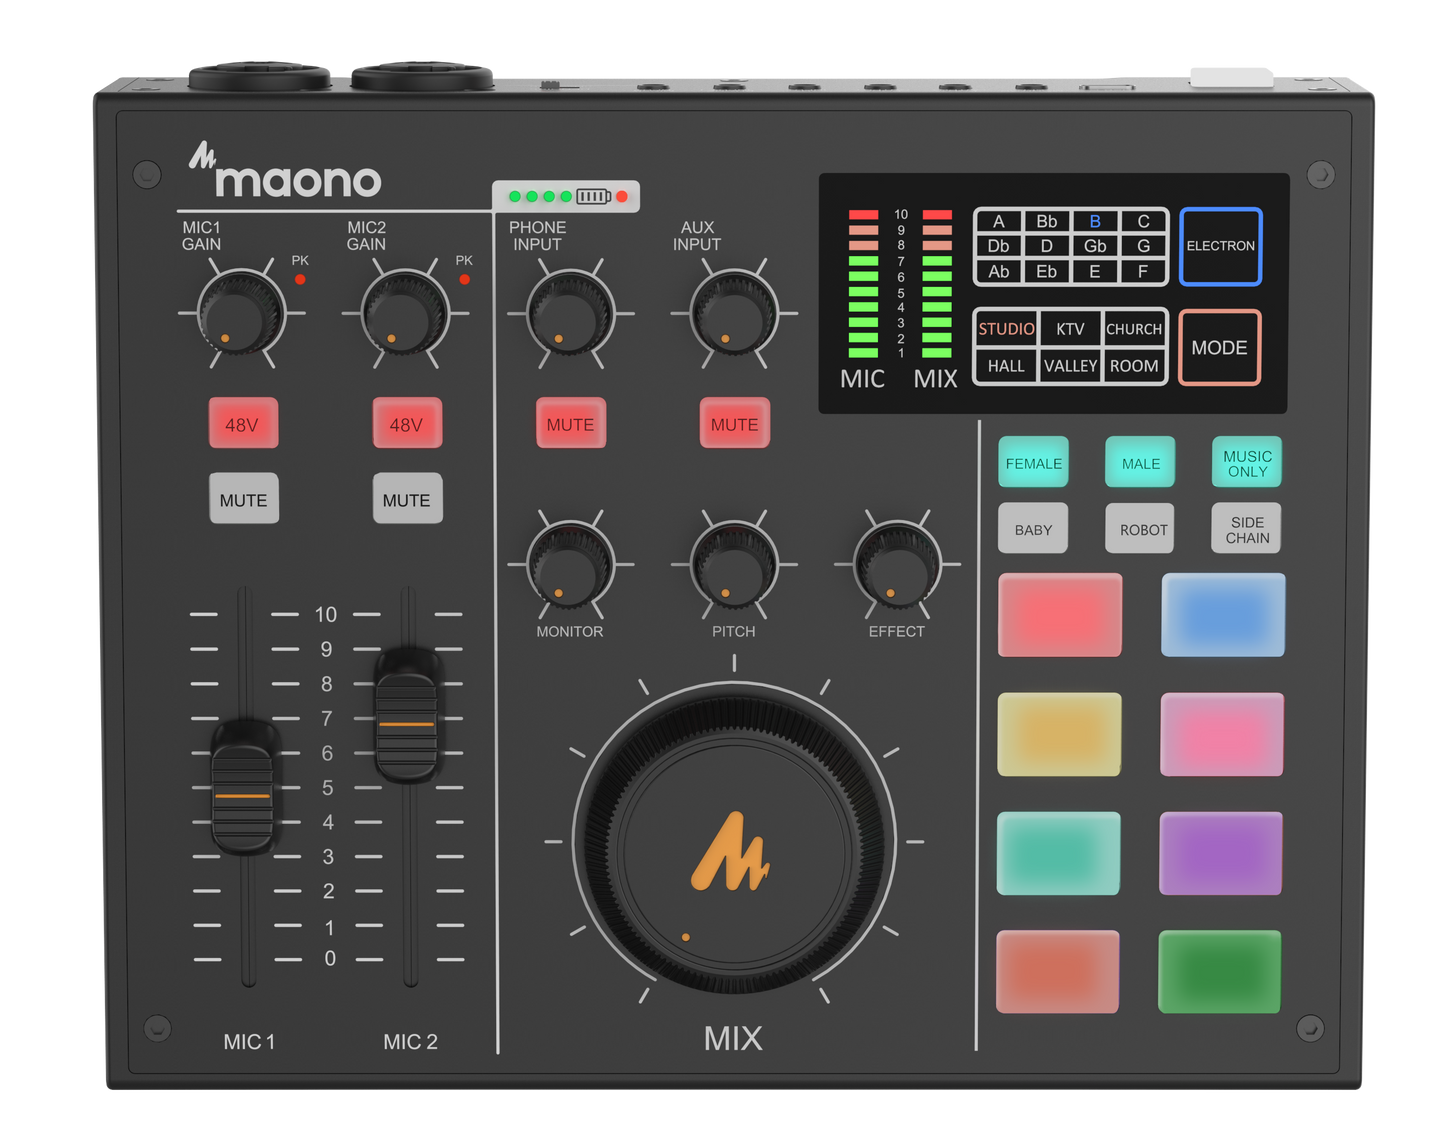 Maono AU-AM100 K3 Maonocaster All-In-One Audio Interface Podcast Production Studio with 2x Condenser Microphone